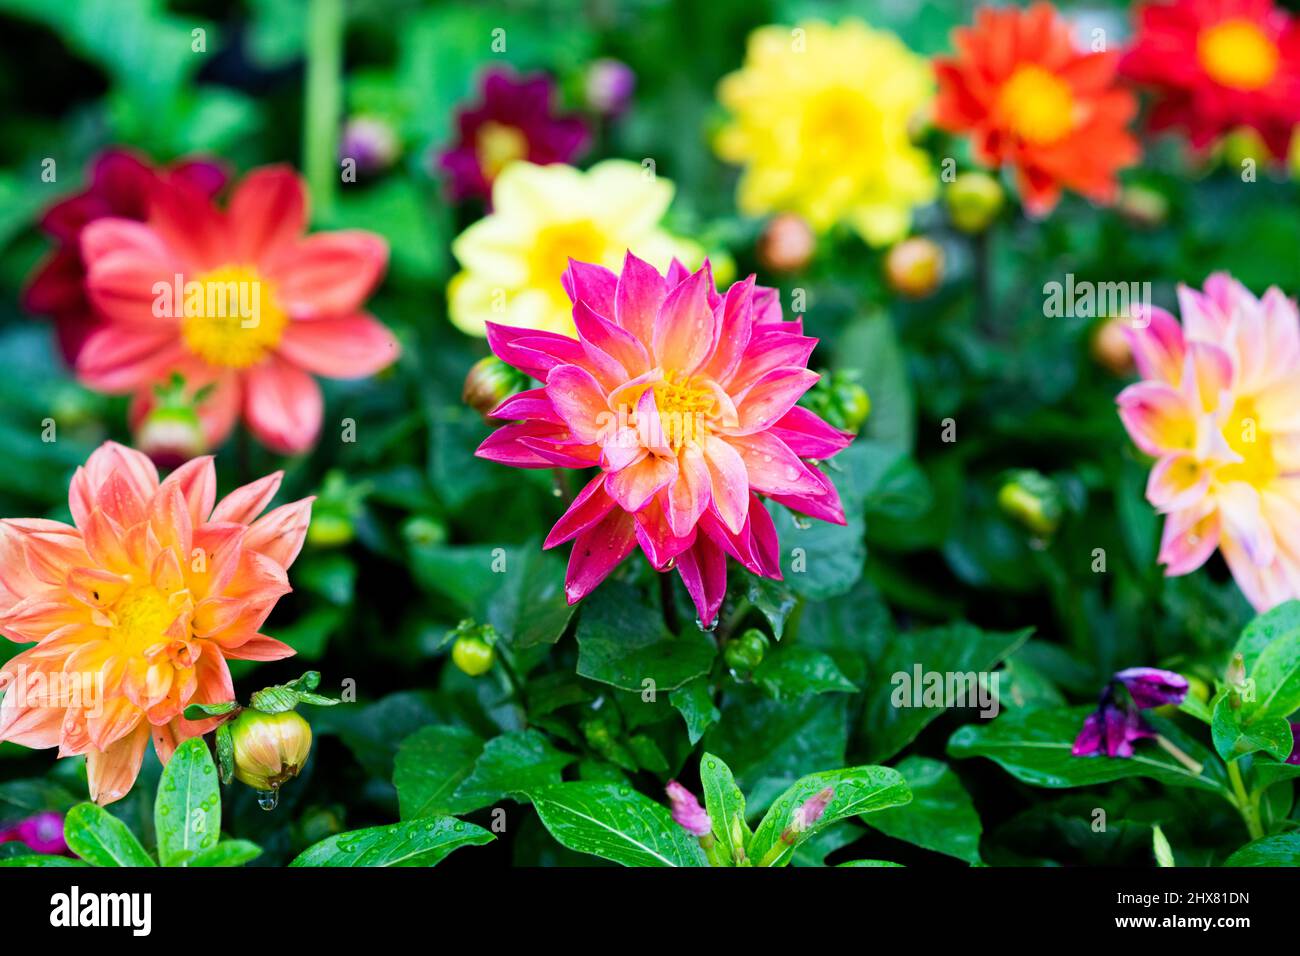 This is a Photograph of a beautiful pink Dahlia flower in bloom. Stock Photo